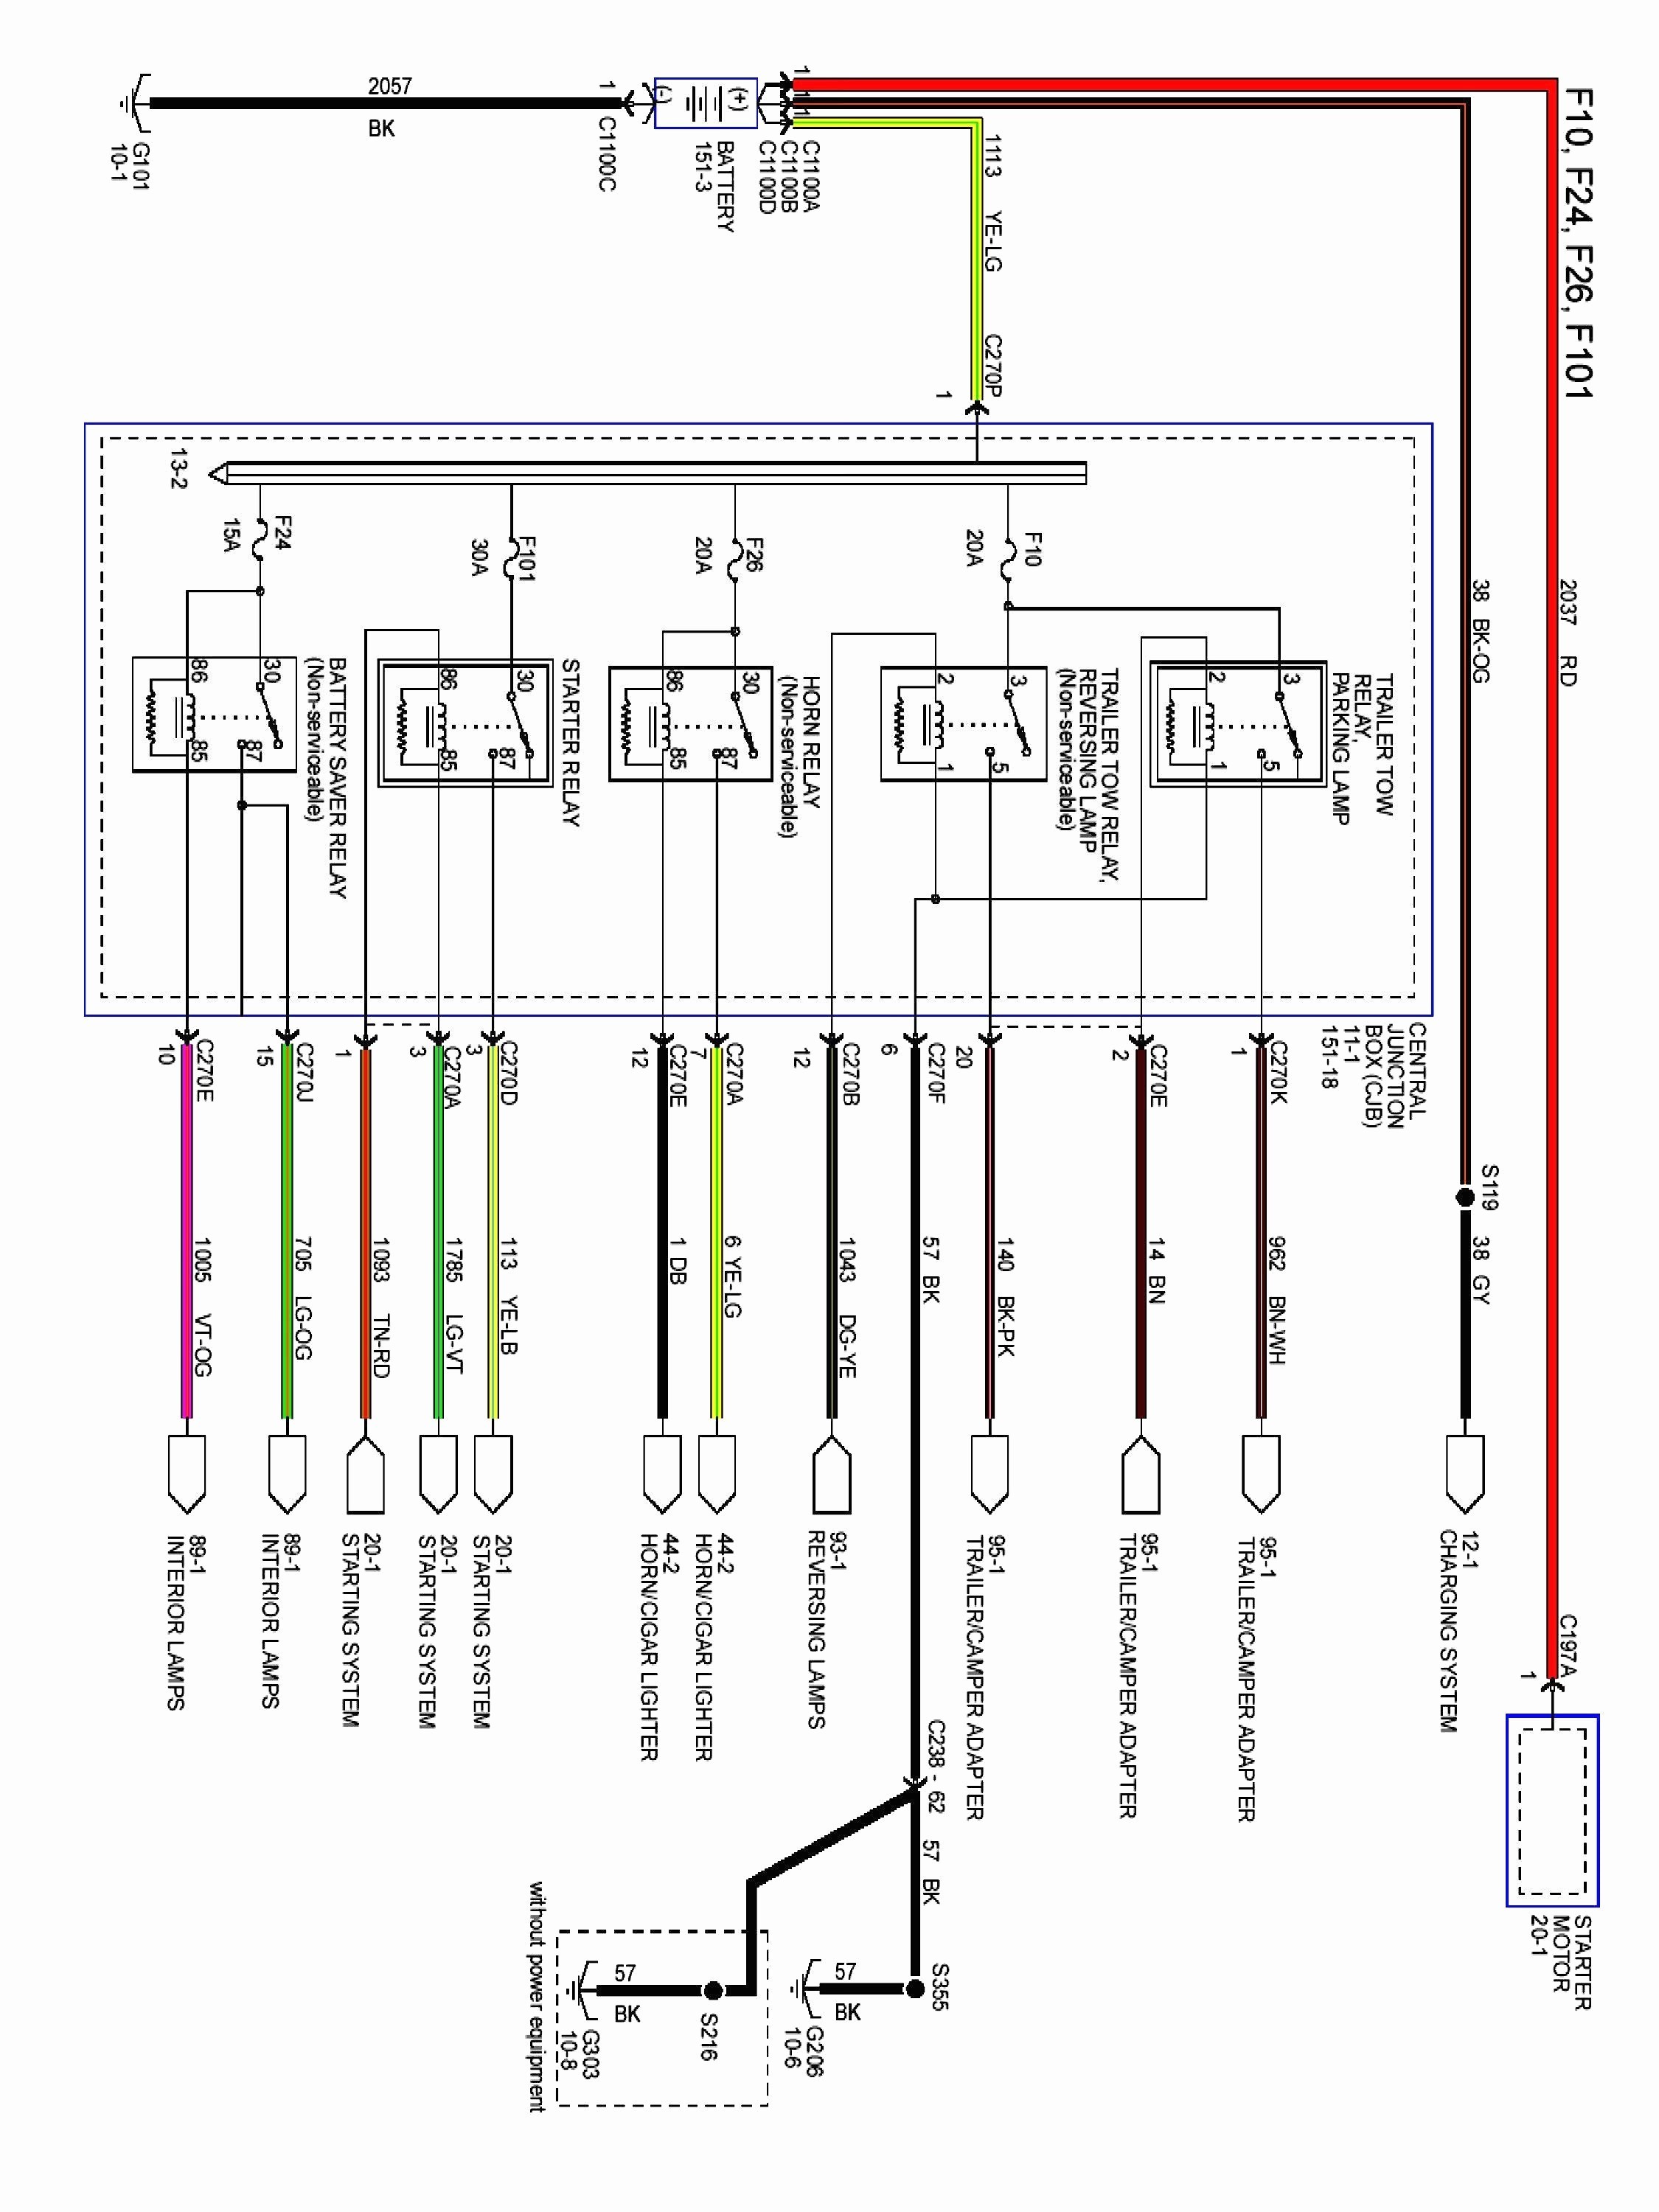 Ford F350 Fuse Diagram Free Downloads Wiring Diagram 2008 Ford F250 Super Duty Trailer Wiring Diagram 2008 Ford Super Duty Wiring Diagram